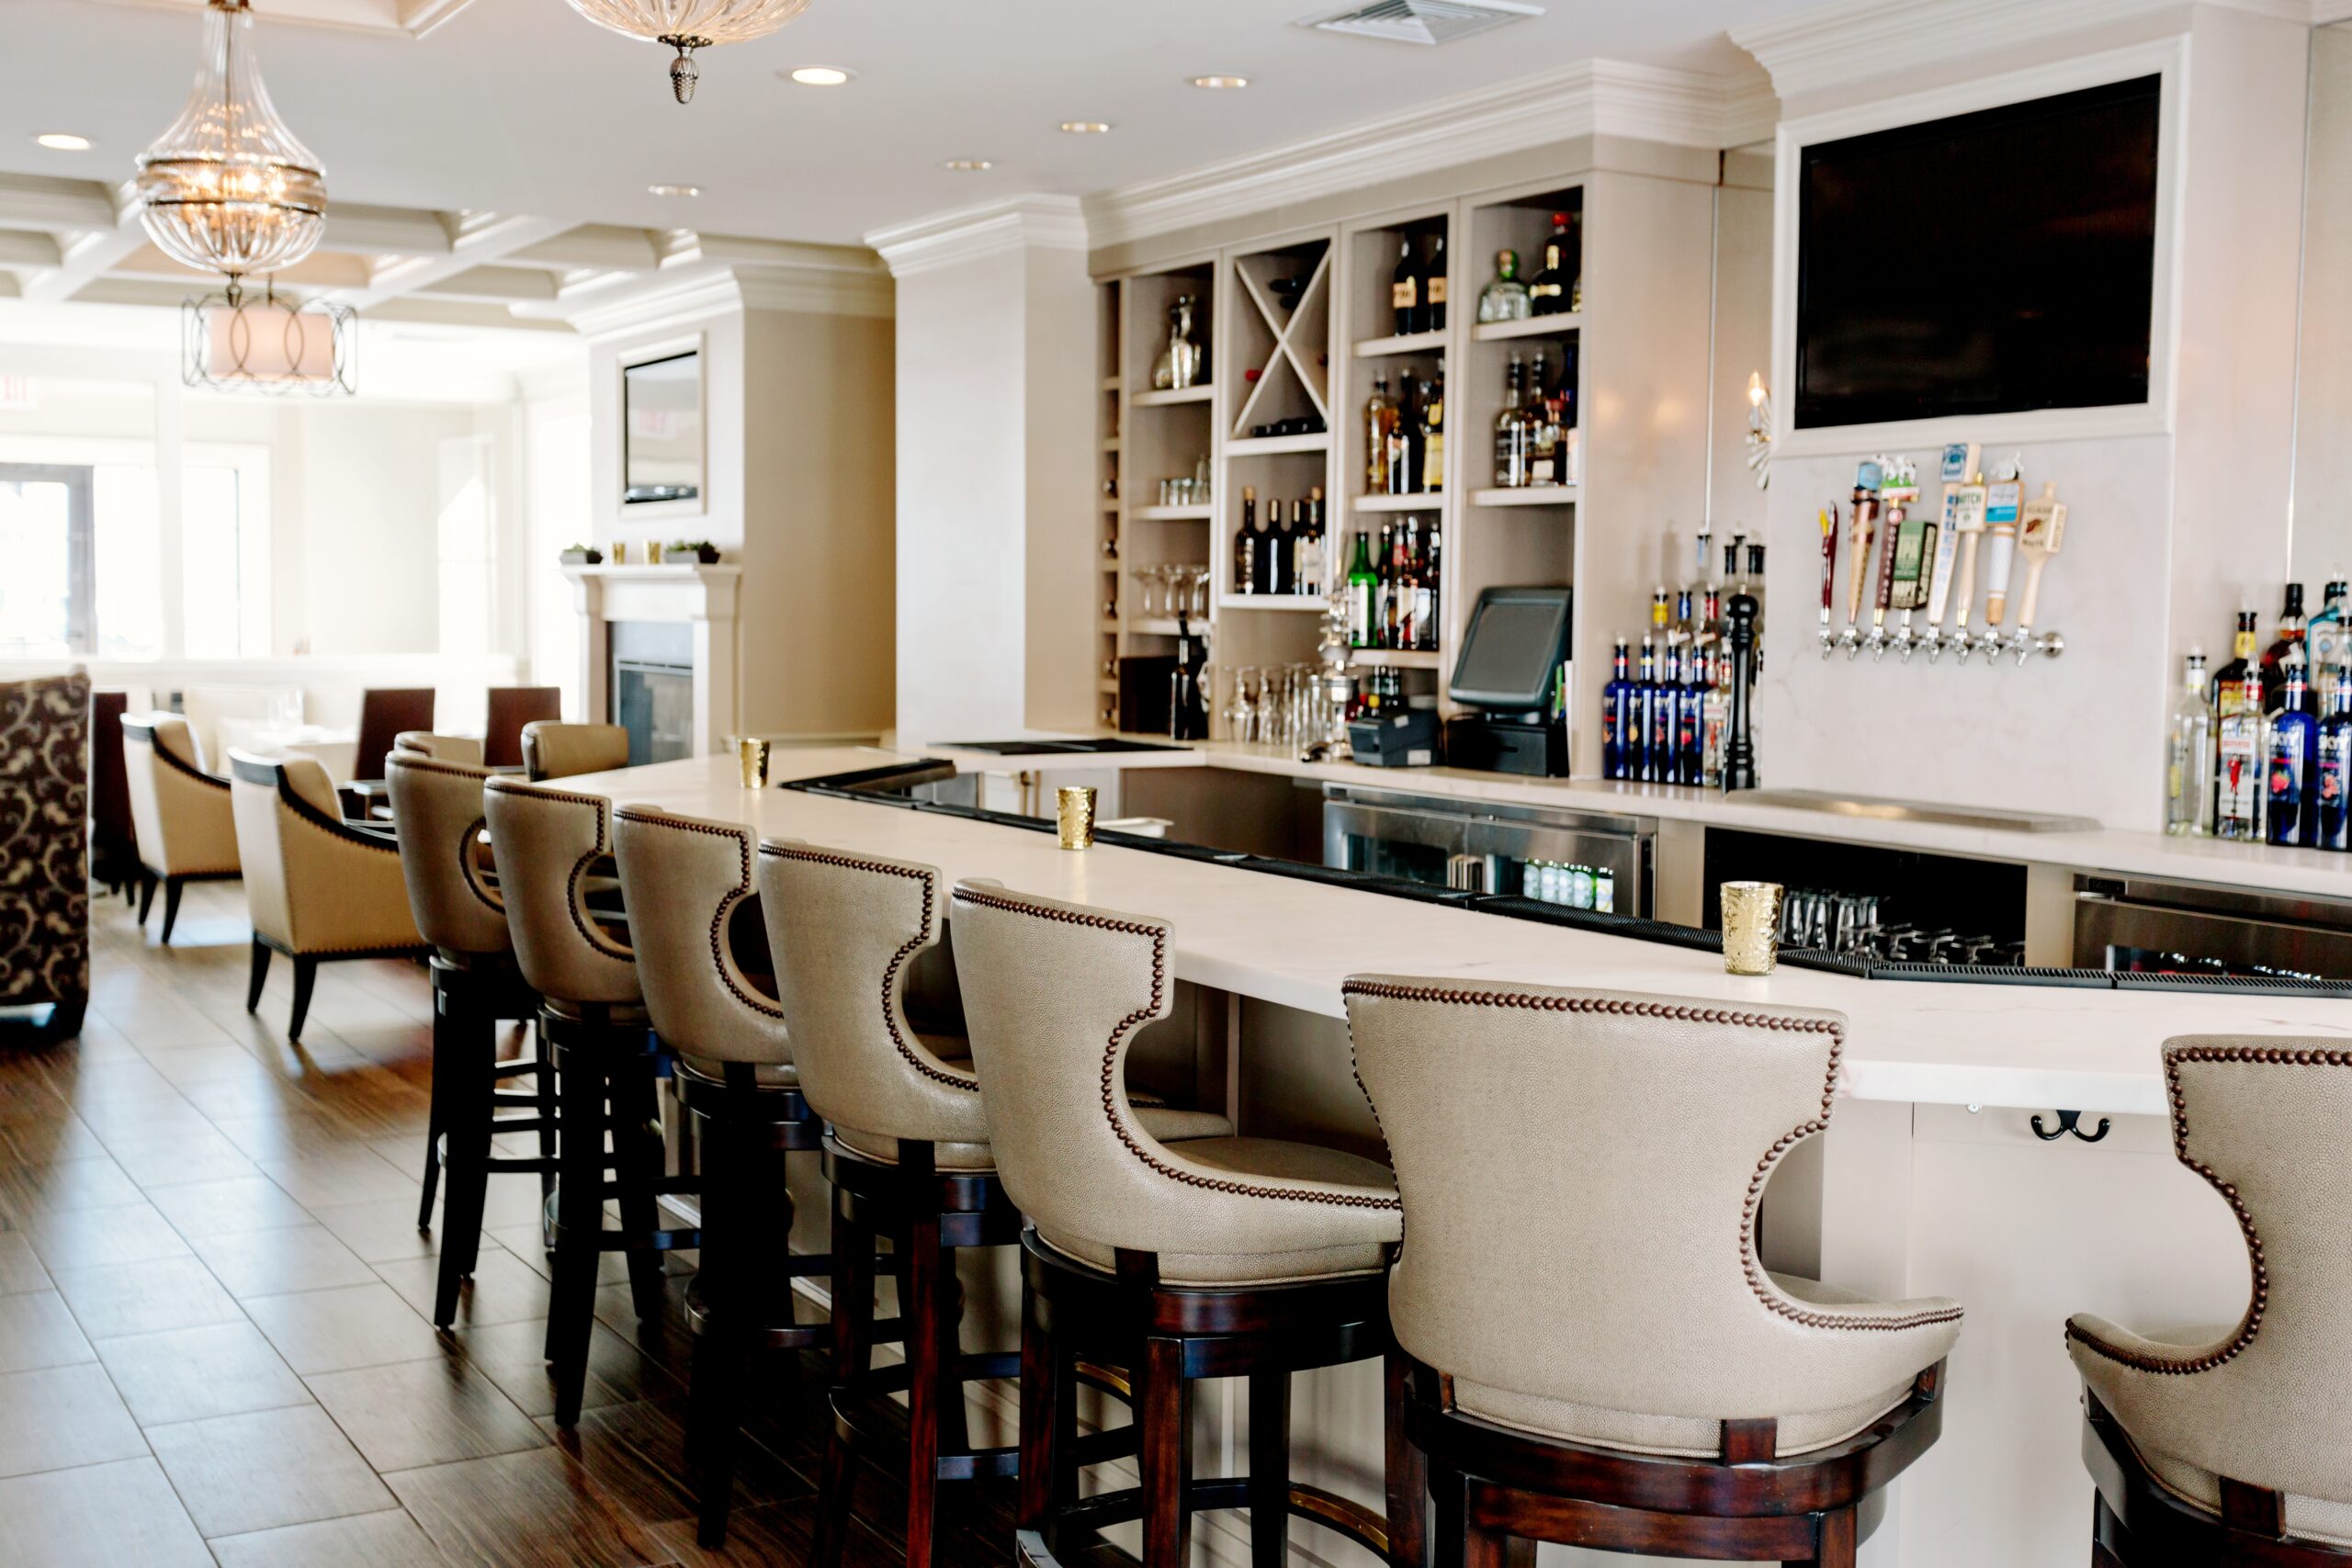 Restaurant interior design bar and bistro with white counter and chairs